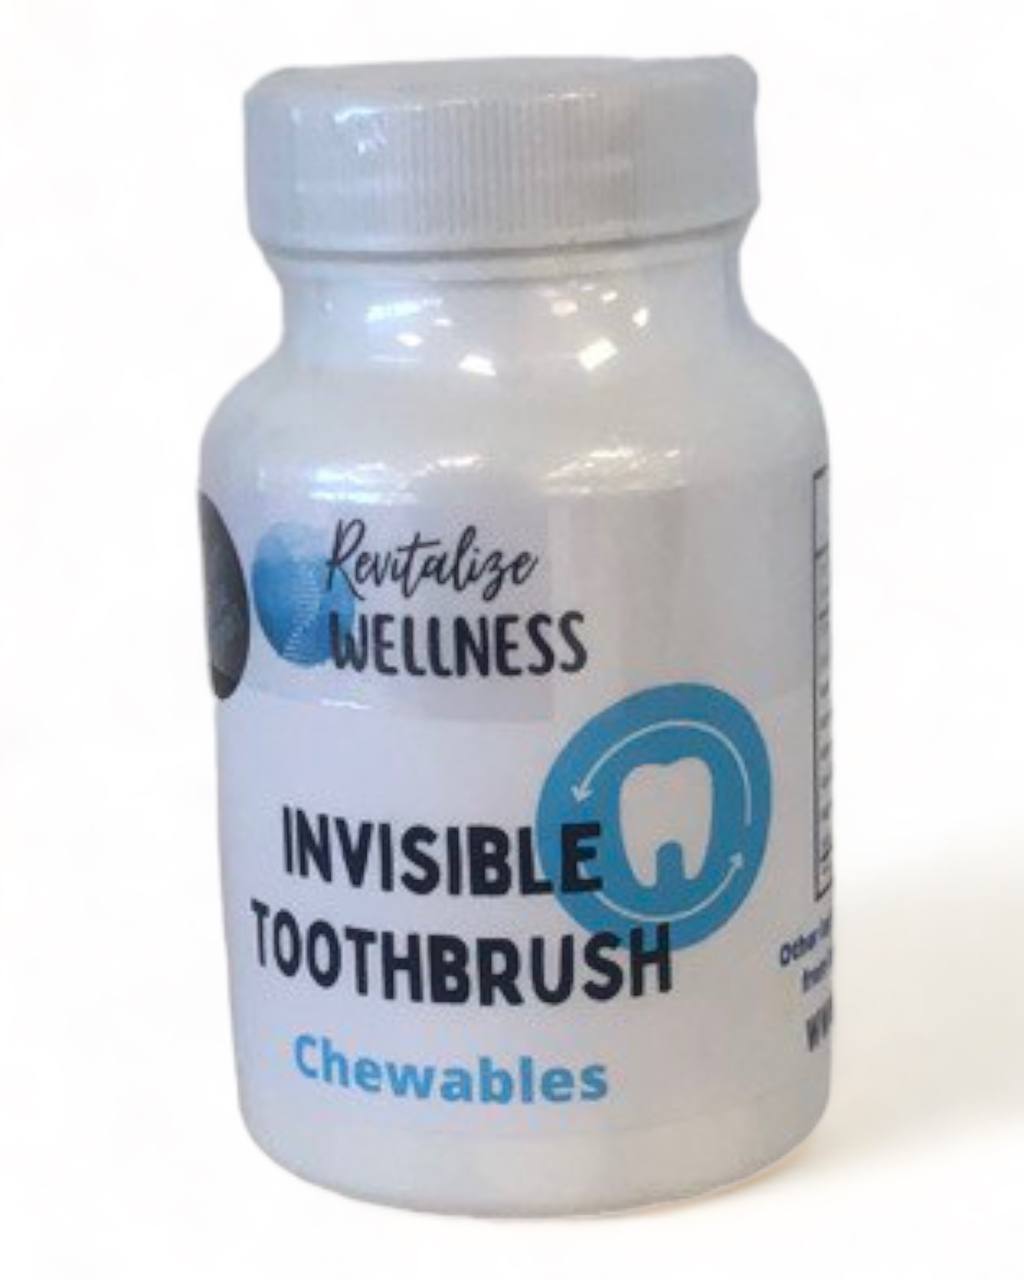 The Invisible Toothbrush Chewables